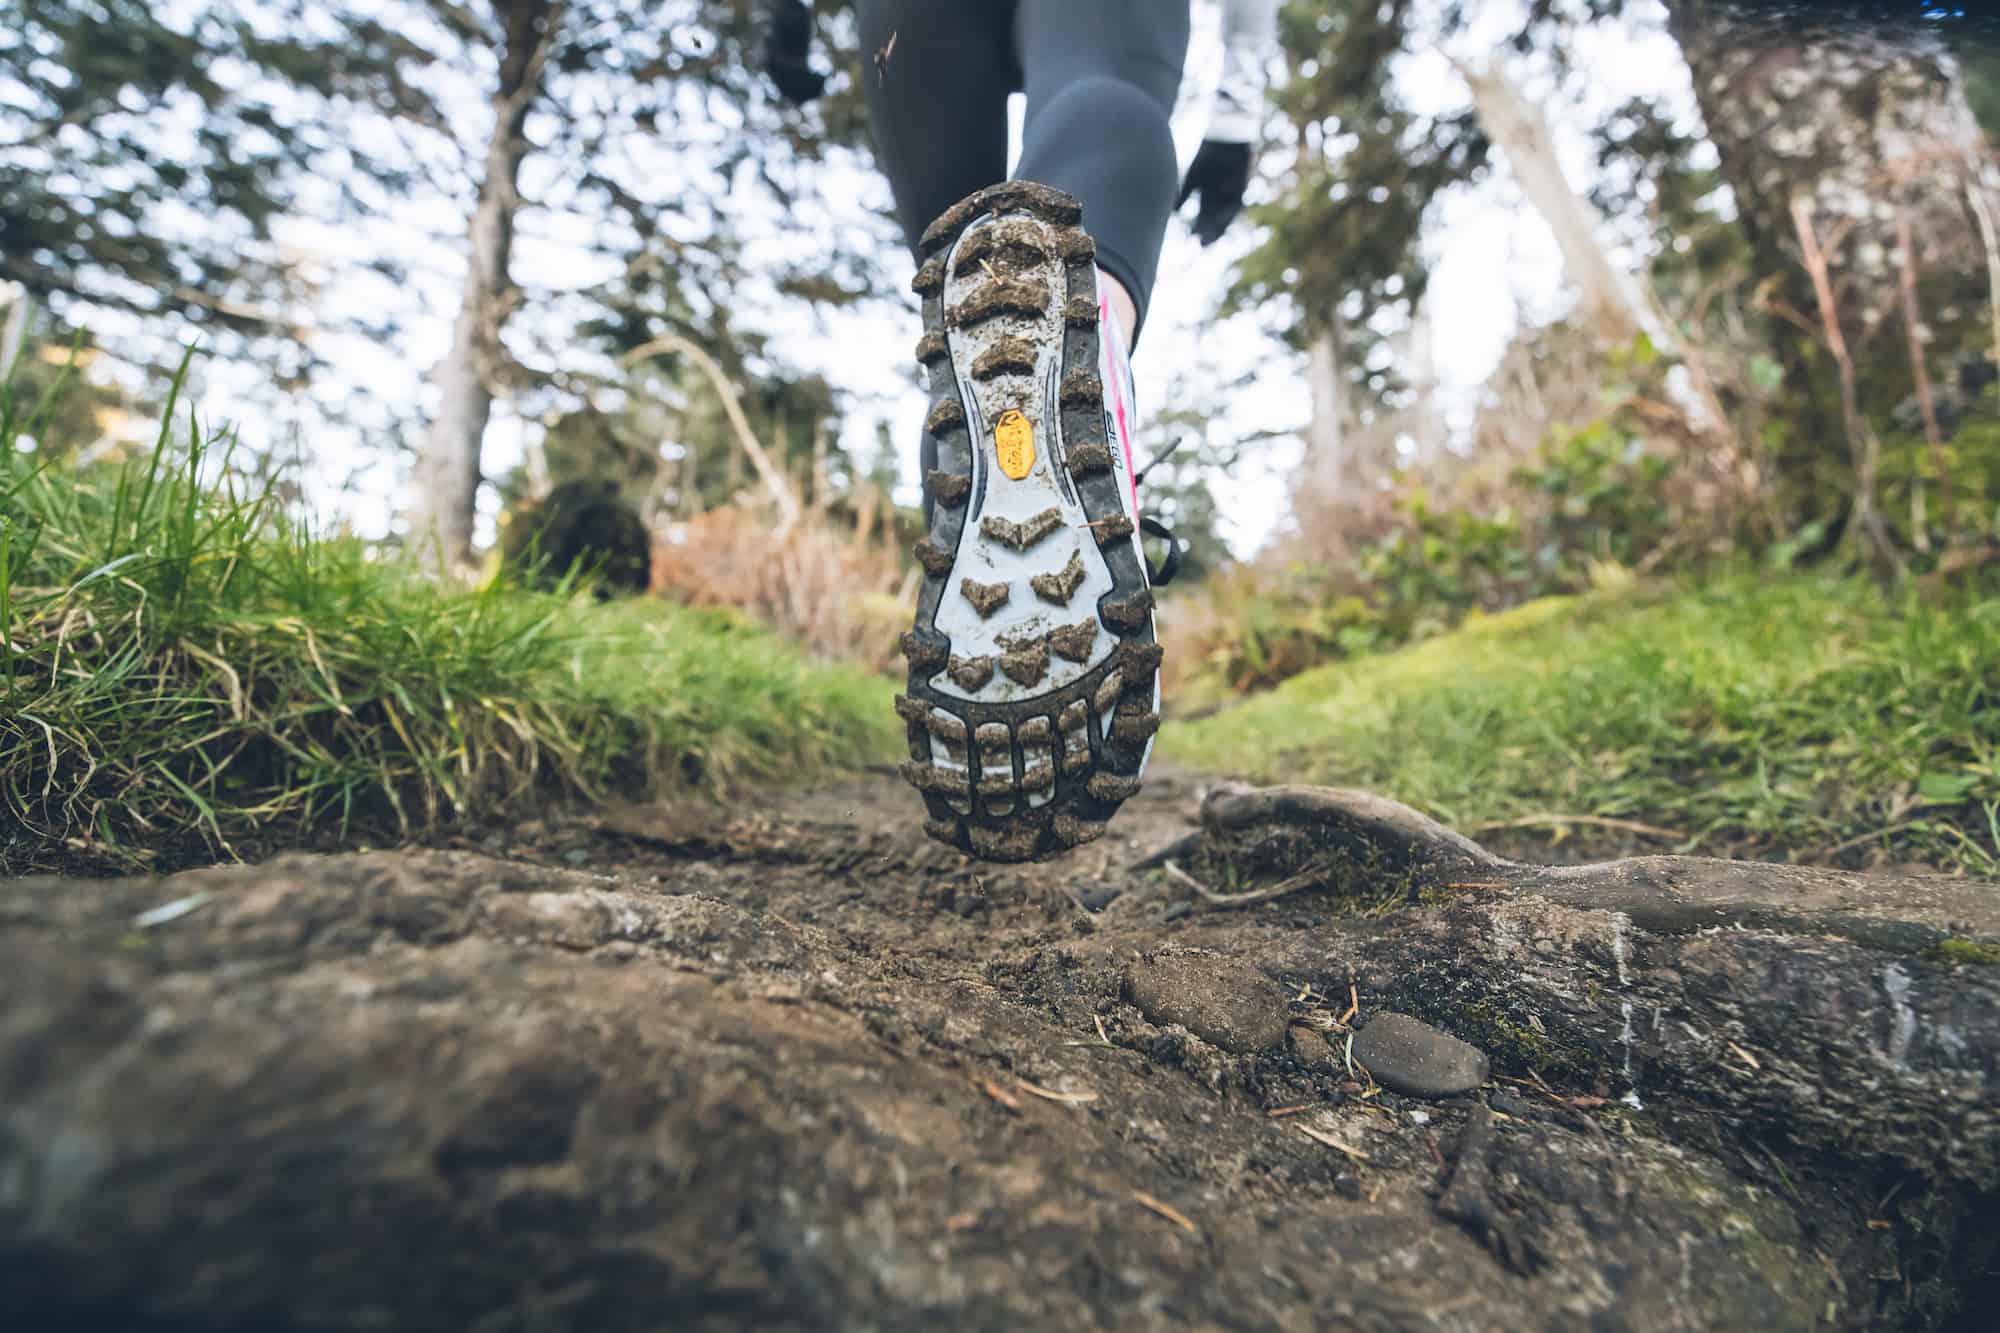 Trail Shoes vs. Boots on Kilimanjaro - Which are Better? | Ultimate ...